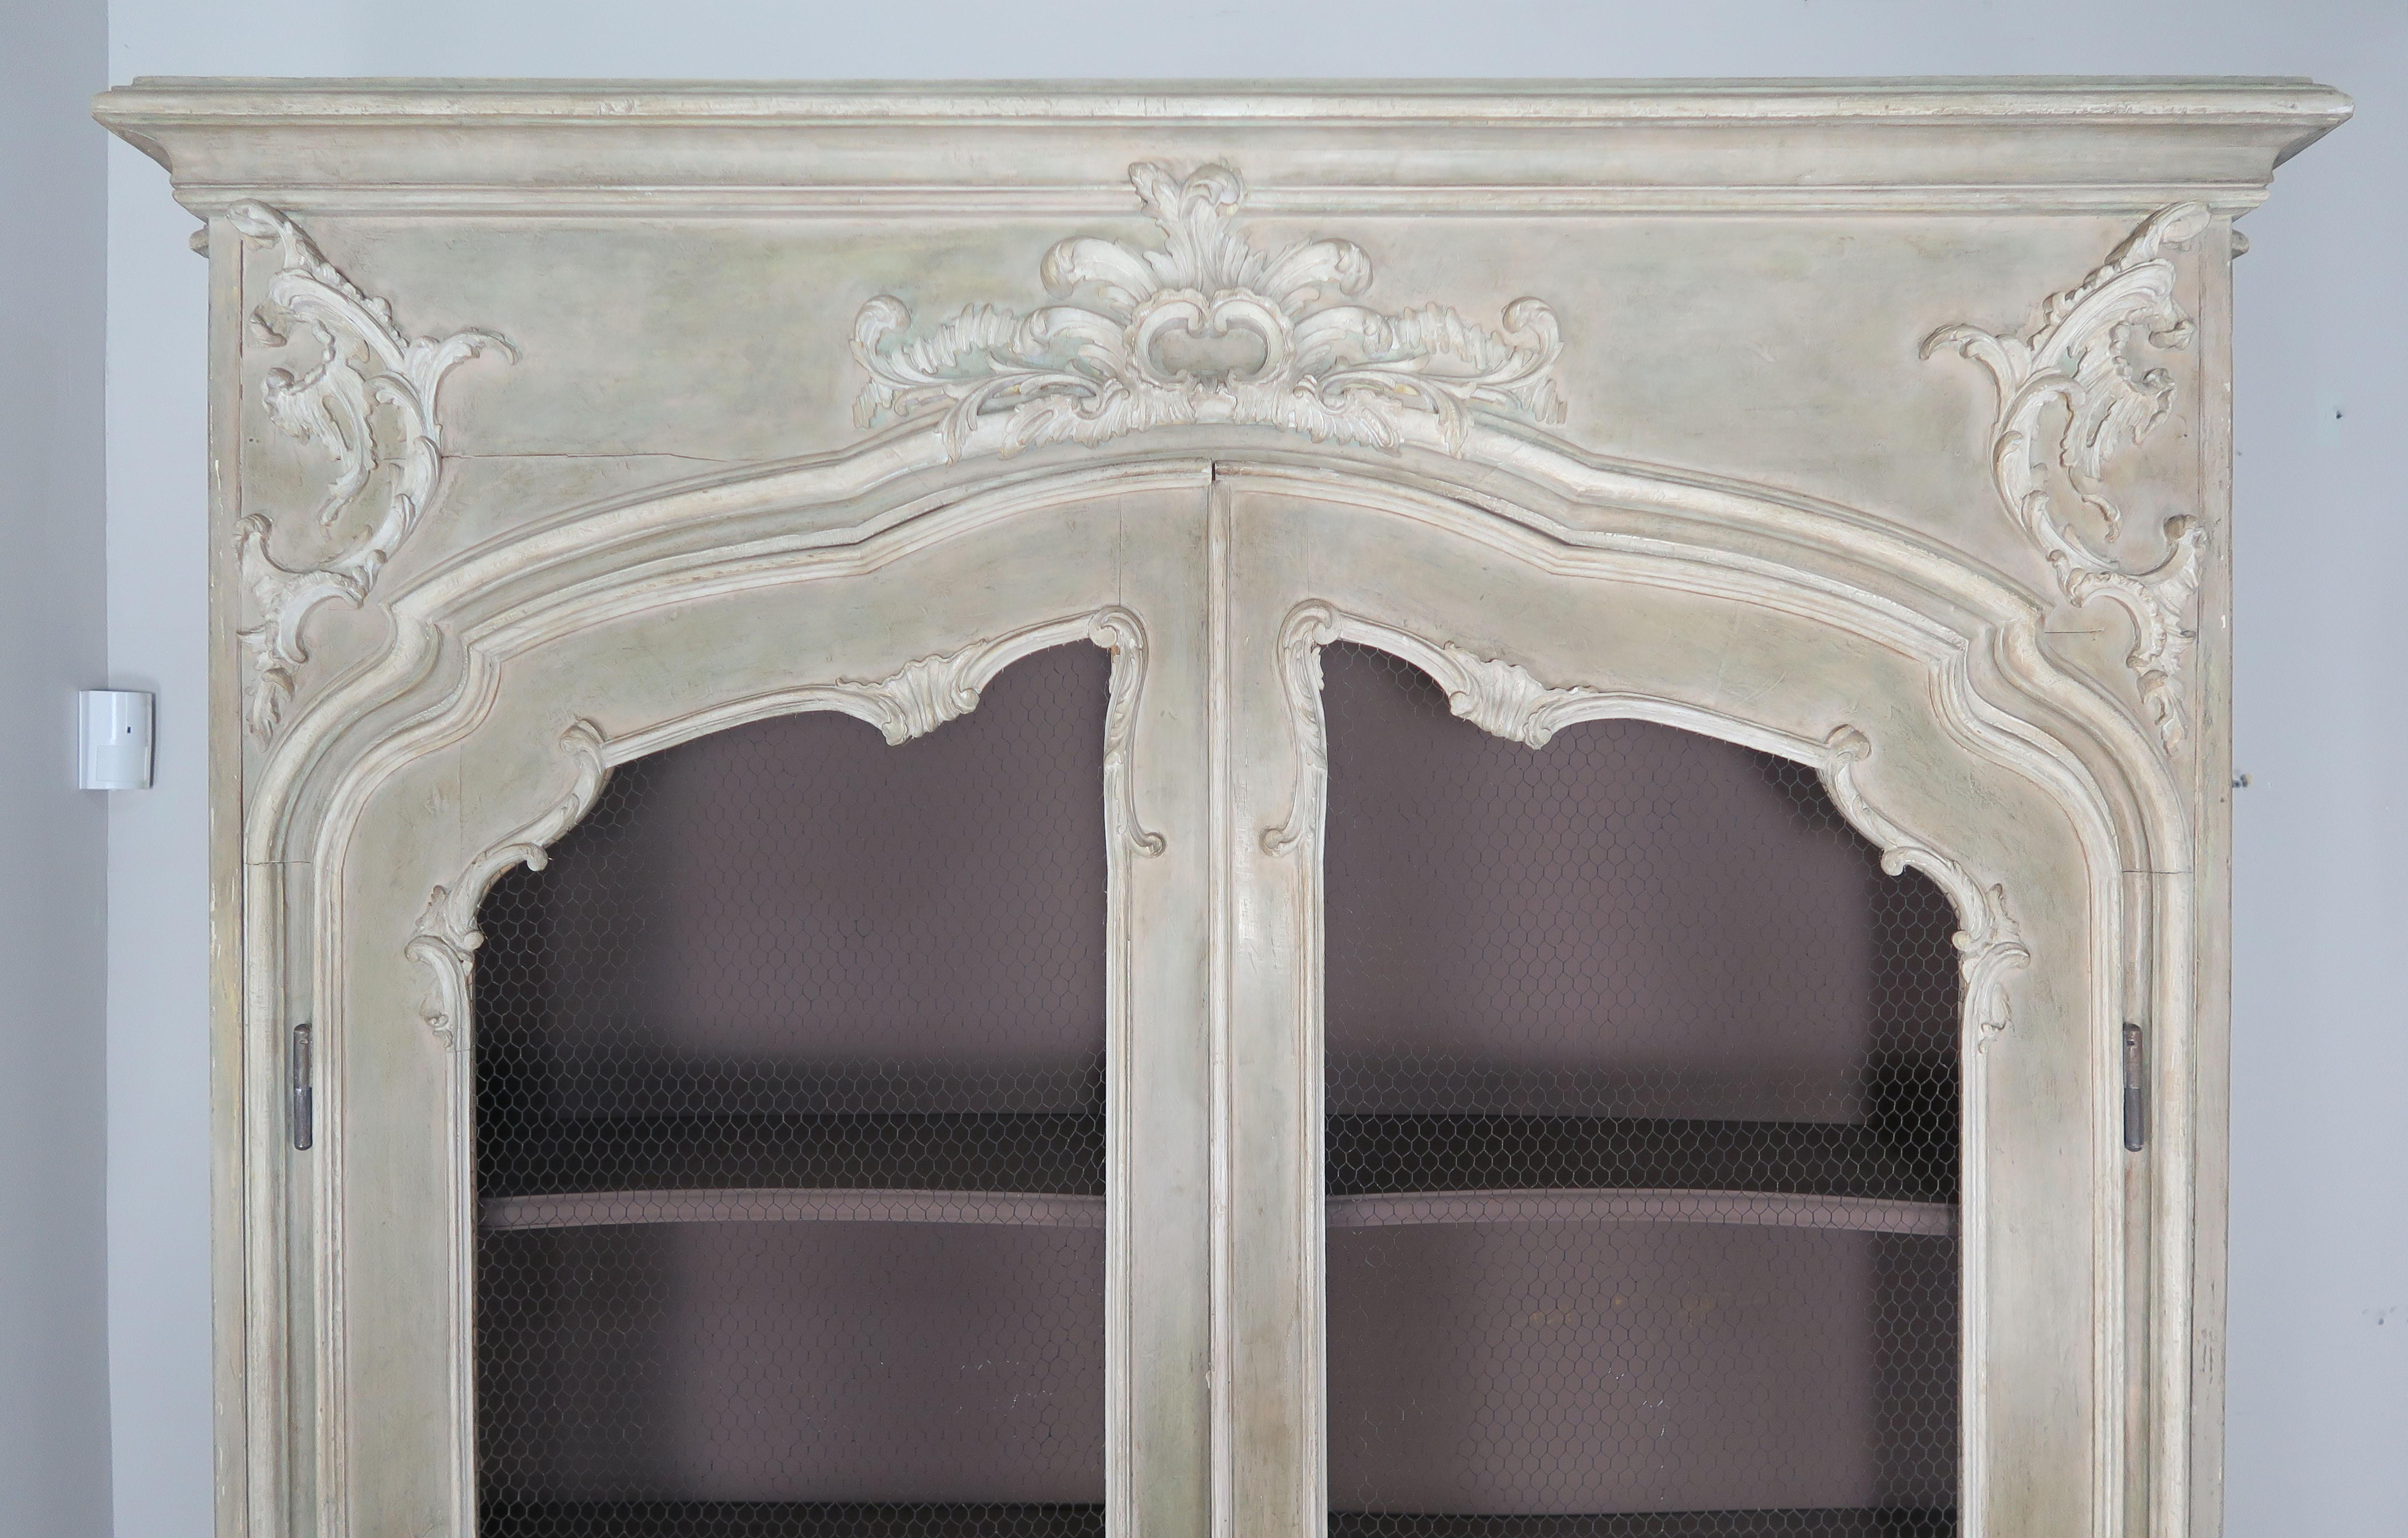 Monumental sized French Louis XV style soft celadon green and cream painted cabinet with scrolls and acanthus leaf detailing. Inset chicken wire doors, shelving and interior lights.